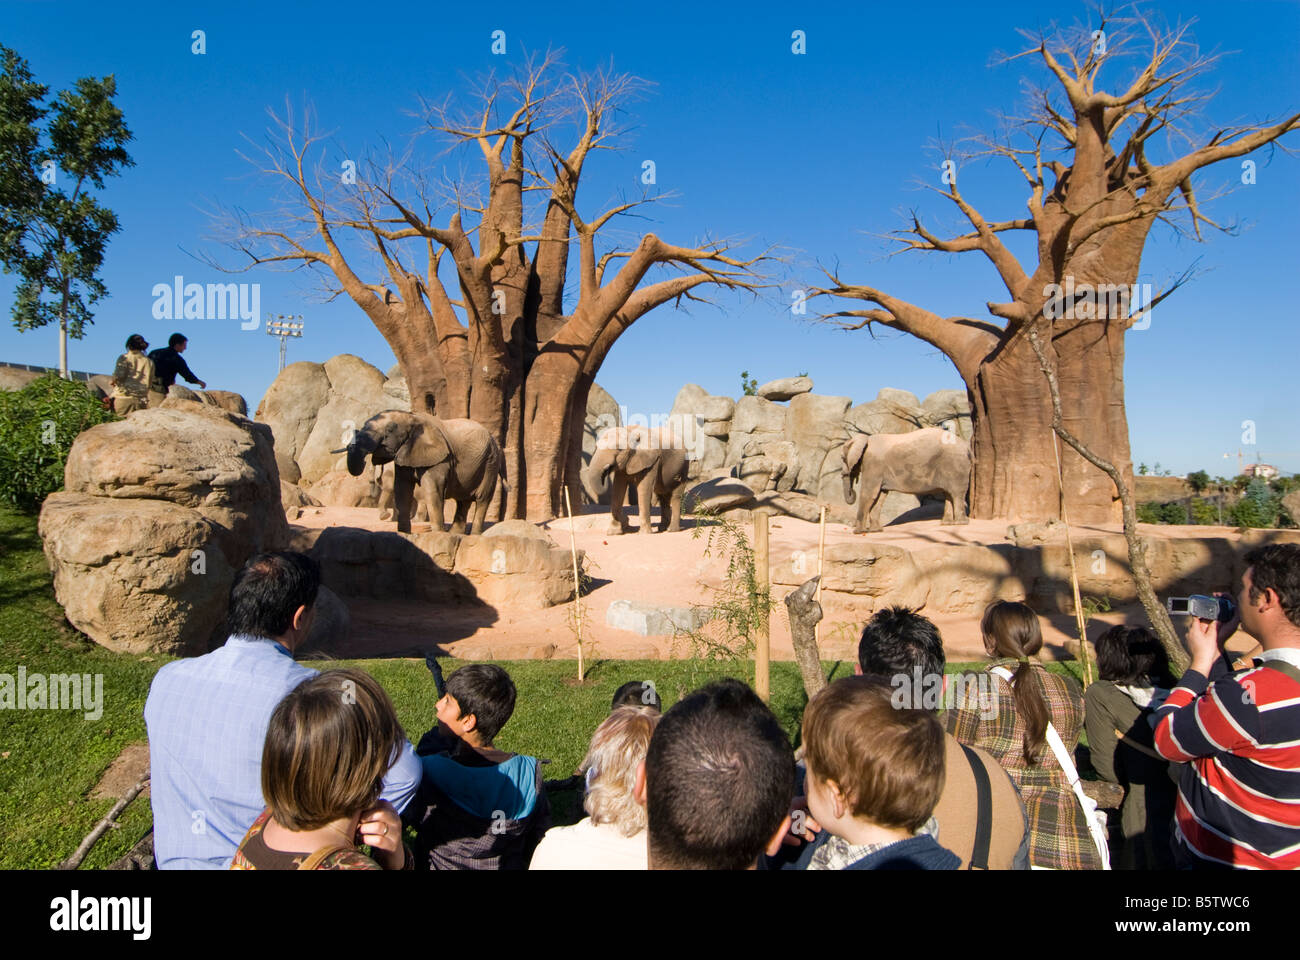 People looking at elephants in enclosure inside the Biopark zoo which opened in the city of Valencia in 2008 Stock Photo